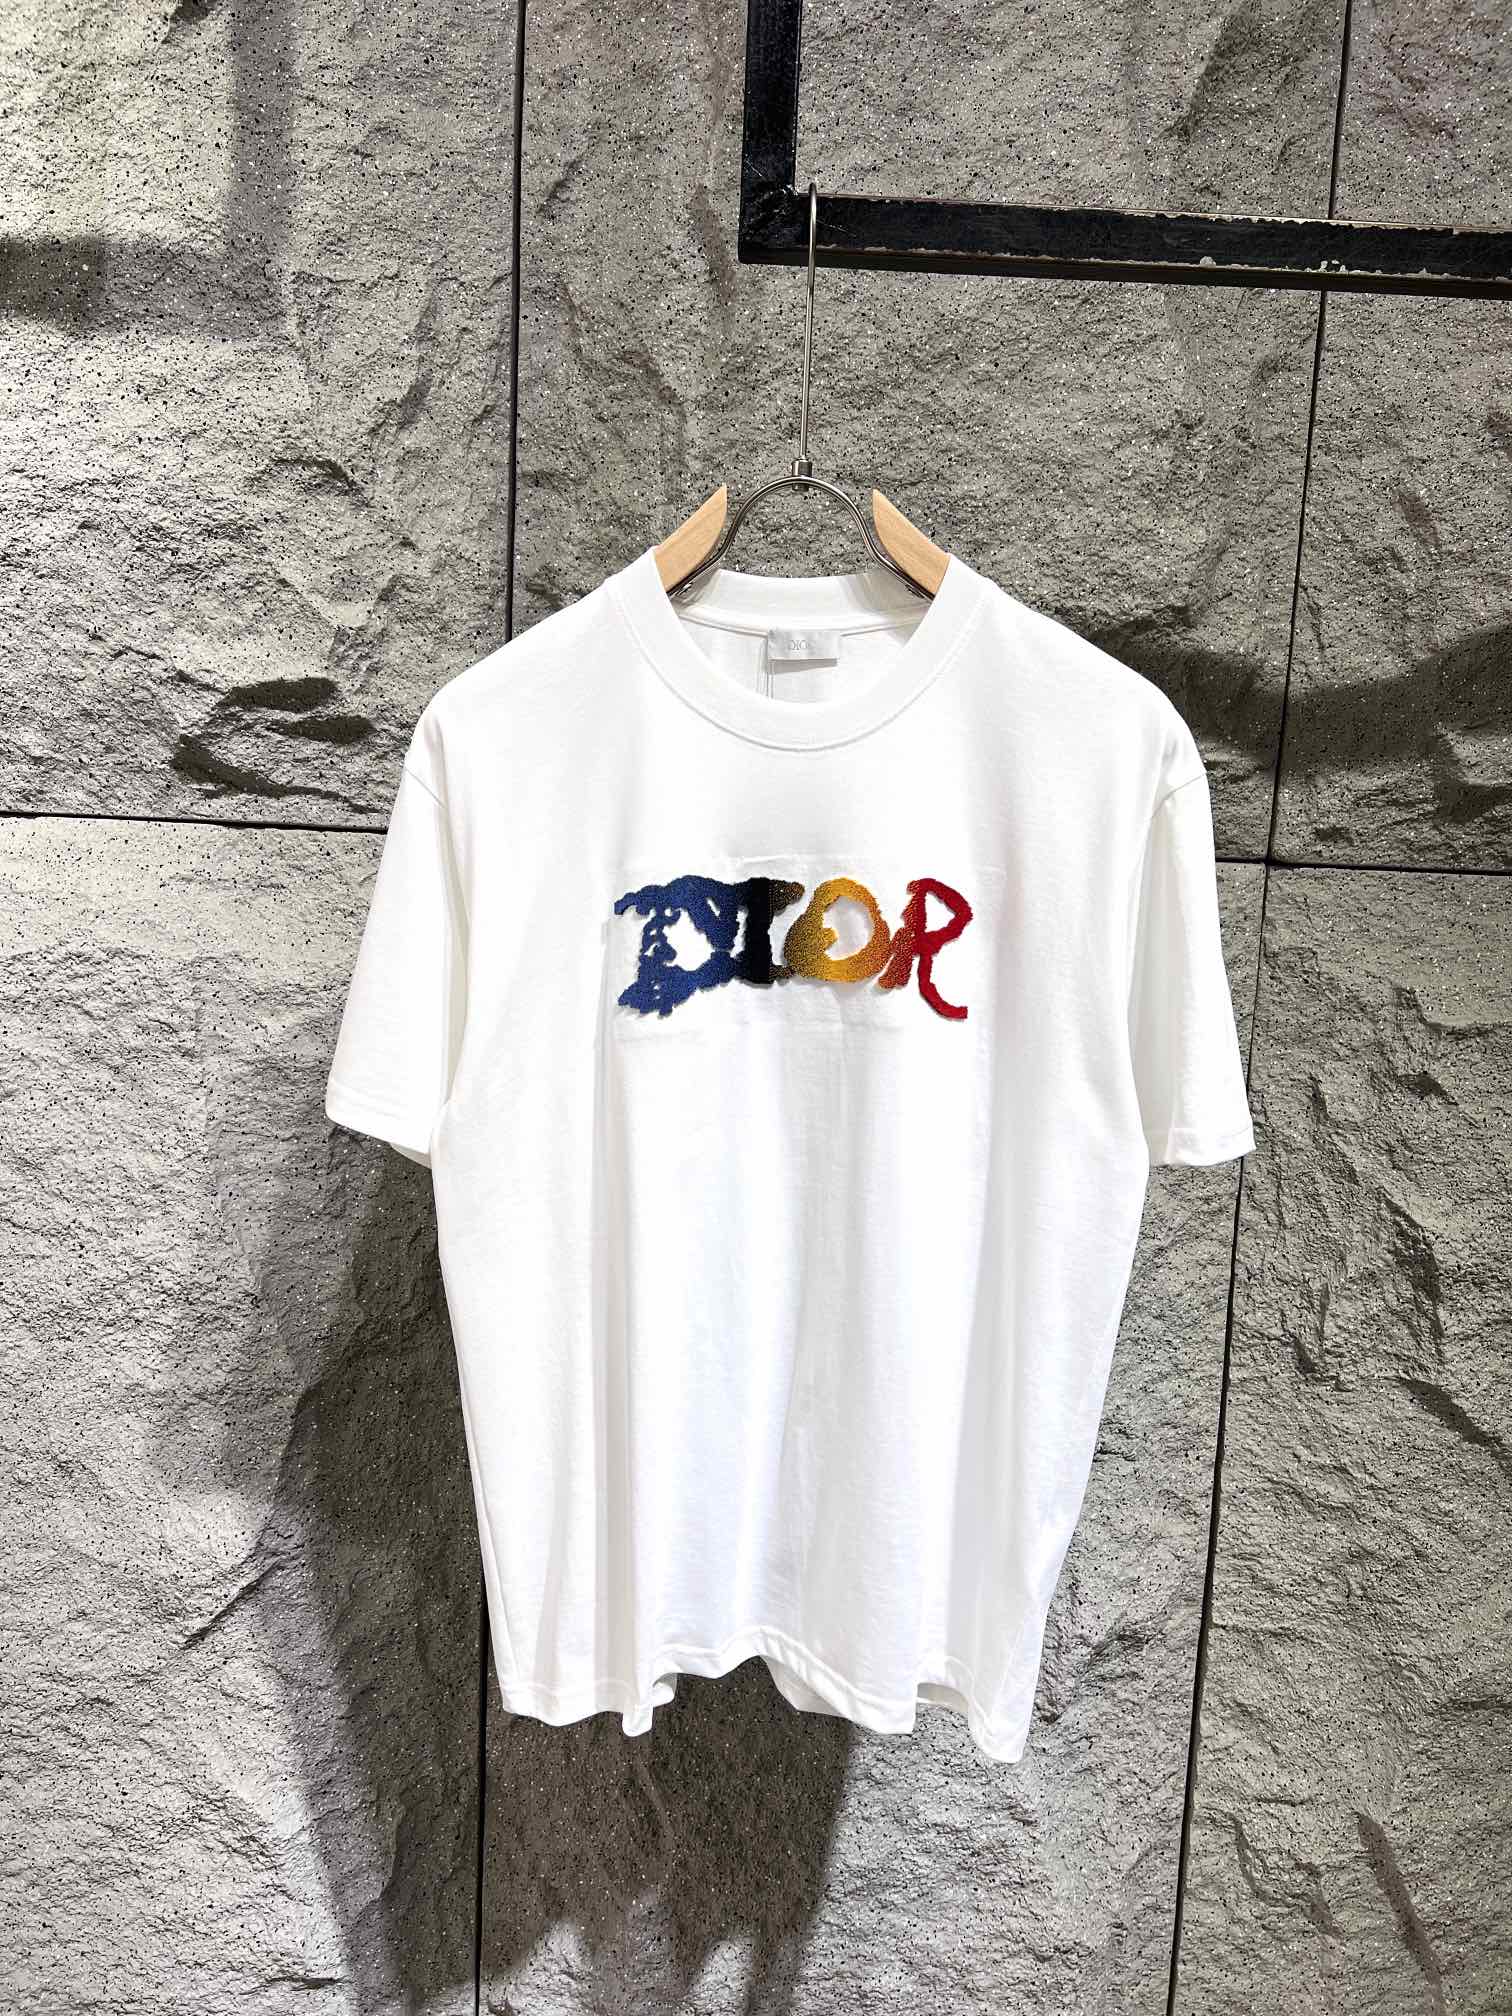 Best Wholesale Replica
 Dior Clothing T-Shirt Black White Embroidery Unisex Cotton Spring/Summer Collection Fashion Short Sleeve